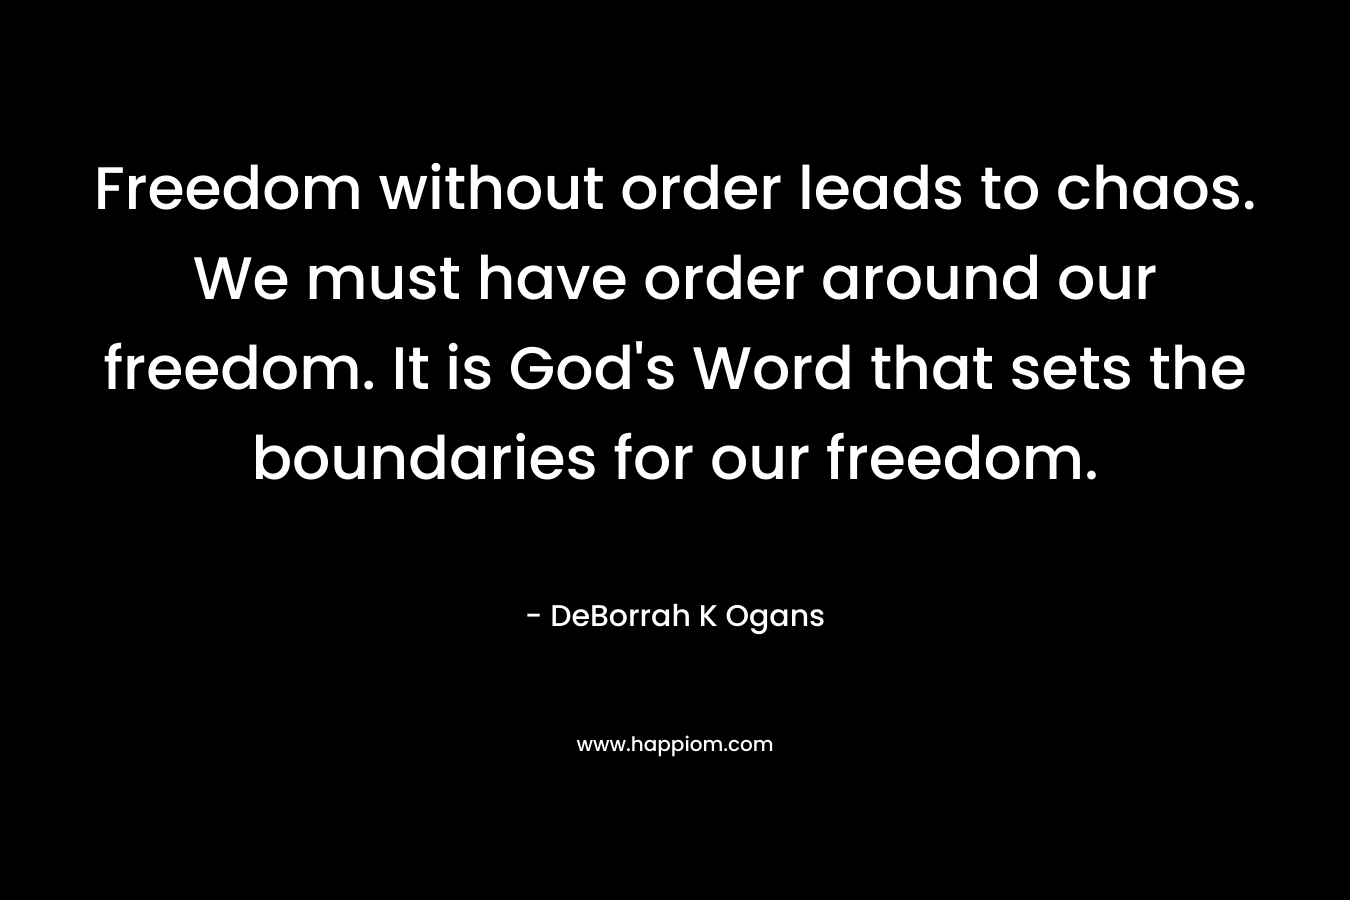 Freedom without order leads to chaos. We must have order around our freedom. It is God's Word that sets the boundaries for our freedom.